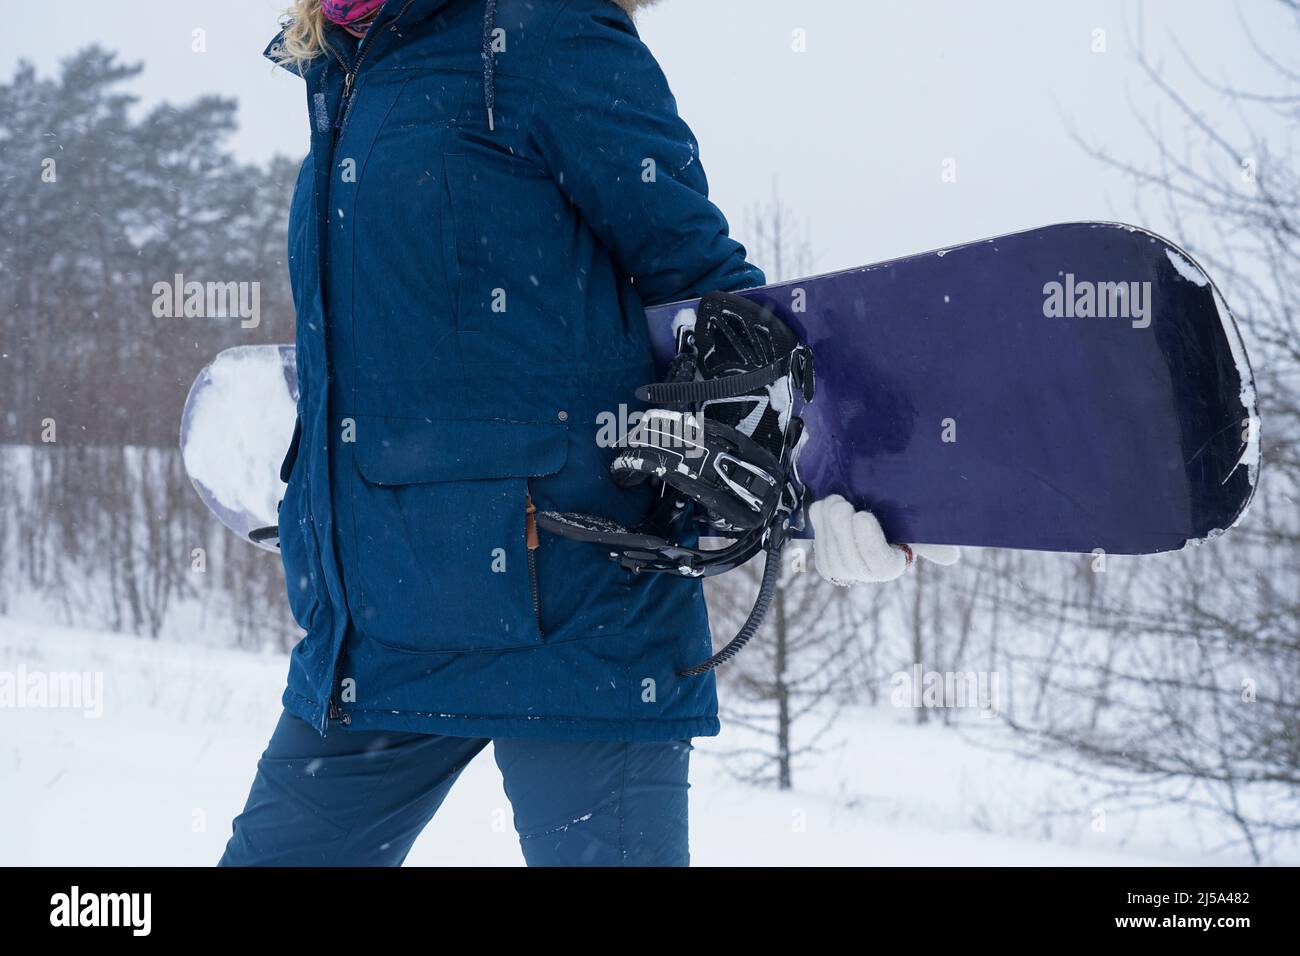 The girl holds a snowboard in her hands, she is dressed in a mountain jacket and a helmet Stock Photo